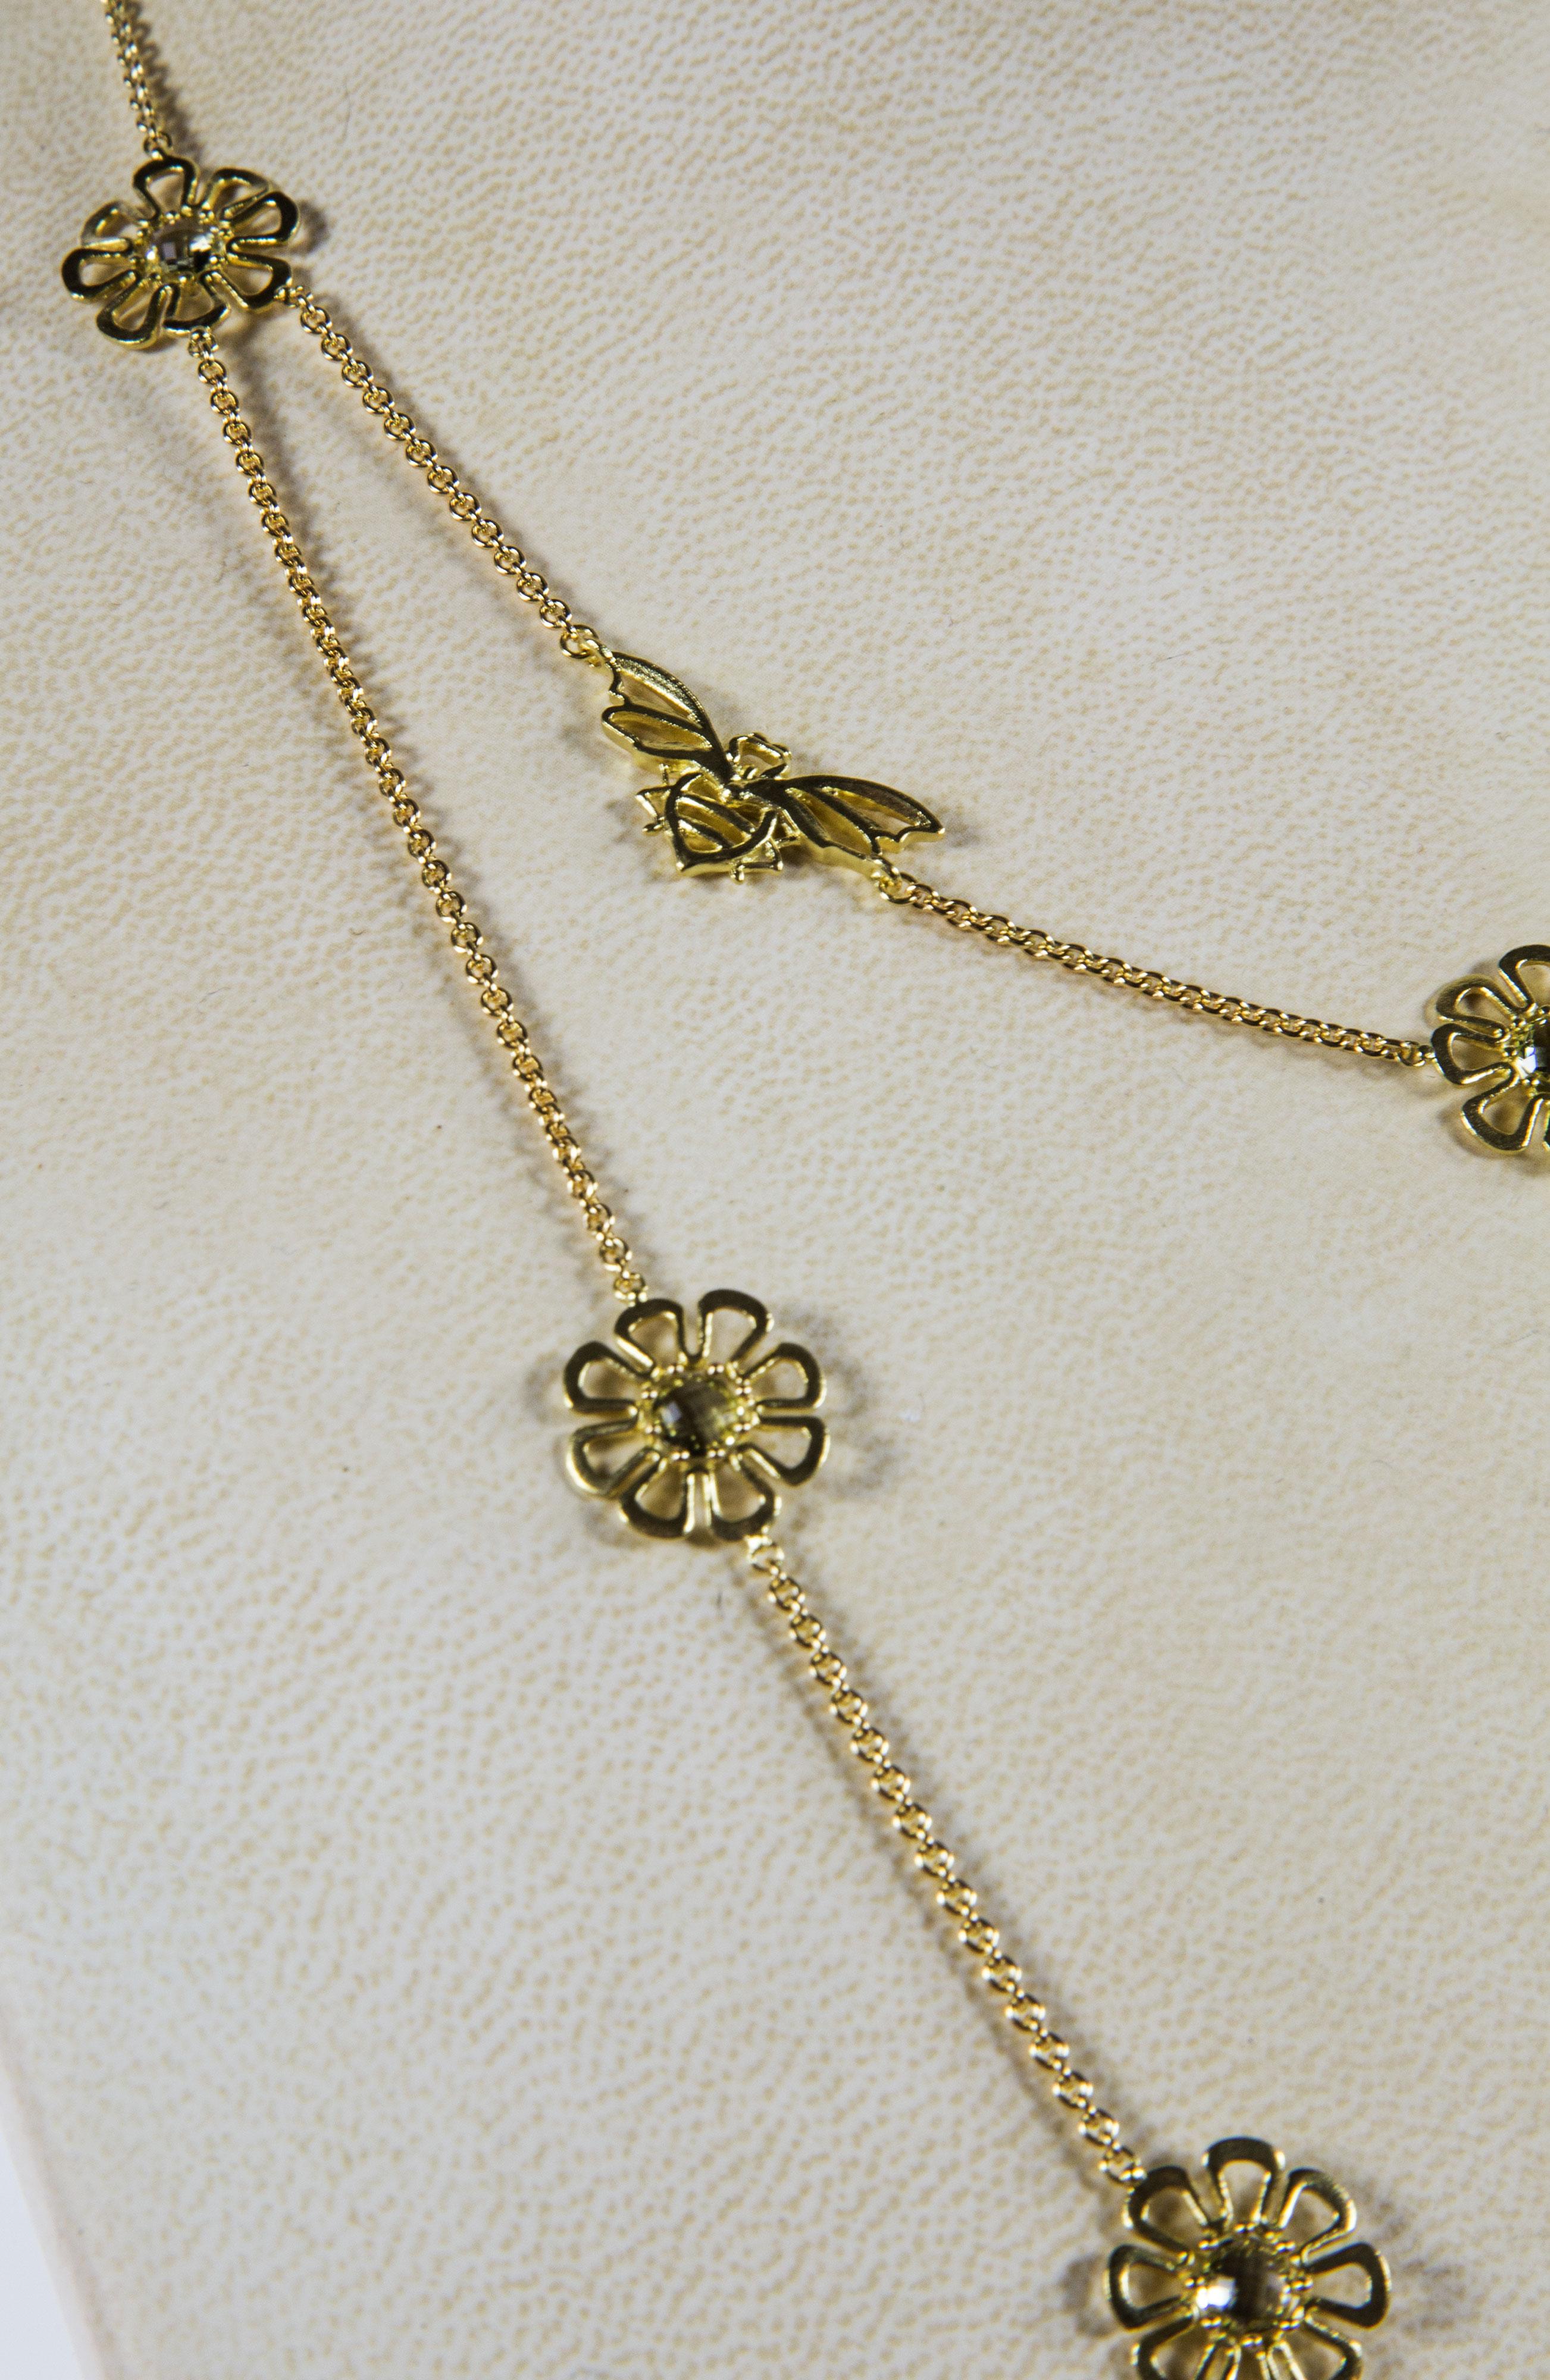 Beautiful signed Paul Morelli Necklace featuring Butterfly and Flower designs; crafted in 18kt Yellow Gold and set with Citrine gemstones; approx. 18”Long; Signature Paul Morelli with great attention to detail; notice the Butterfly motif closure!  A